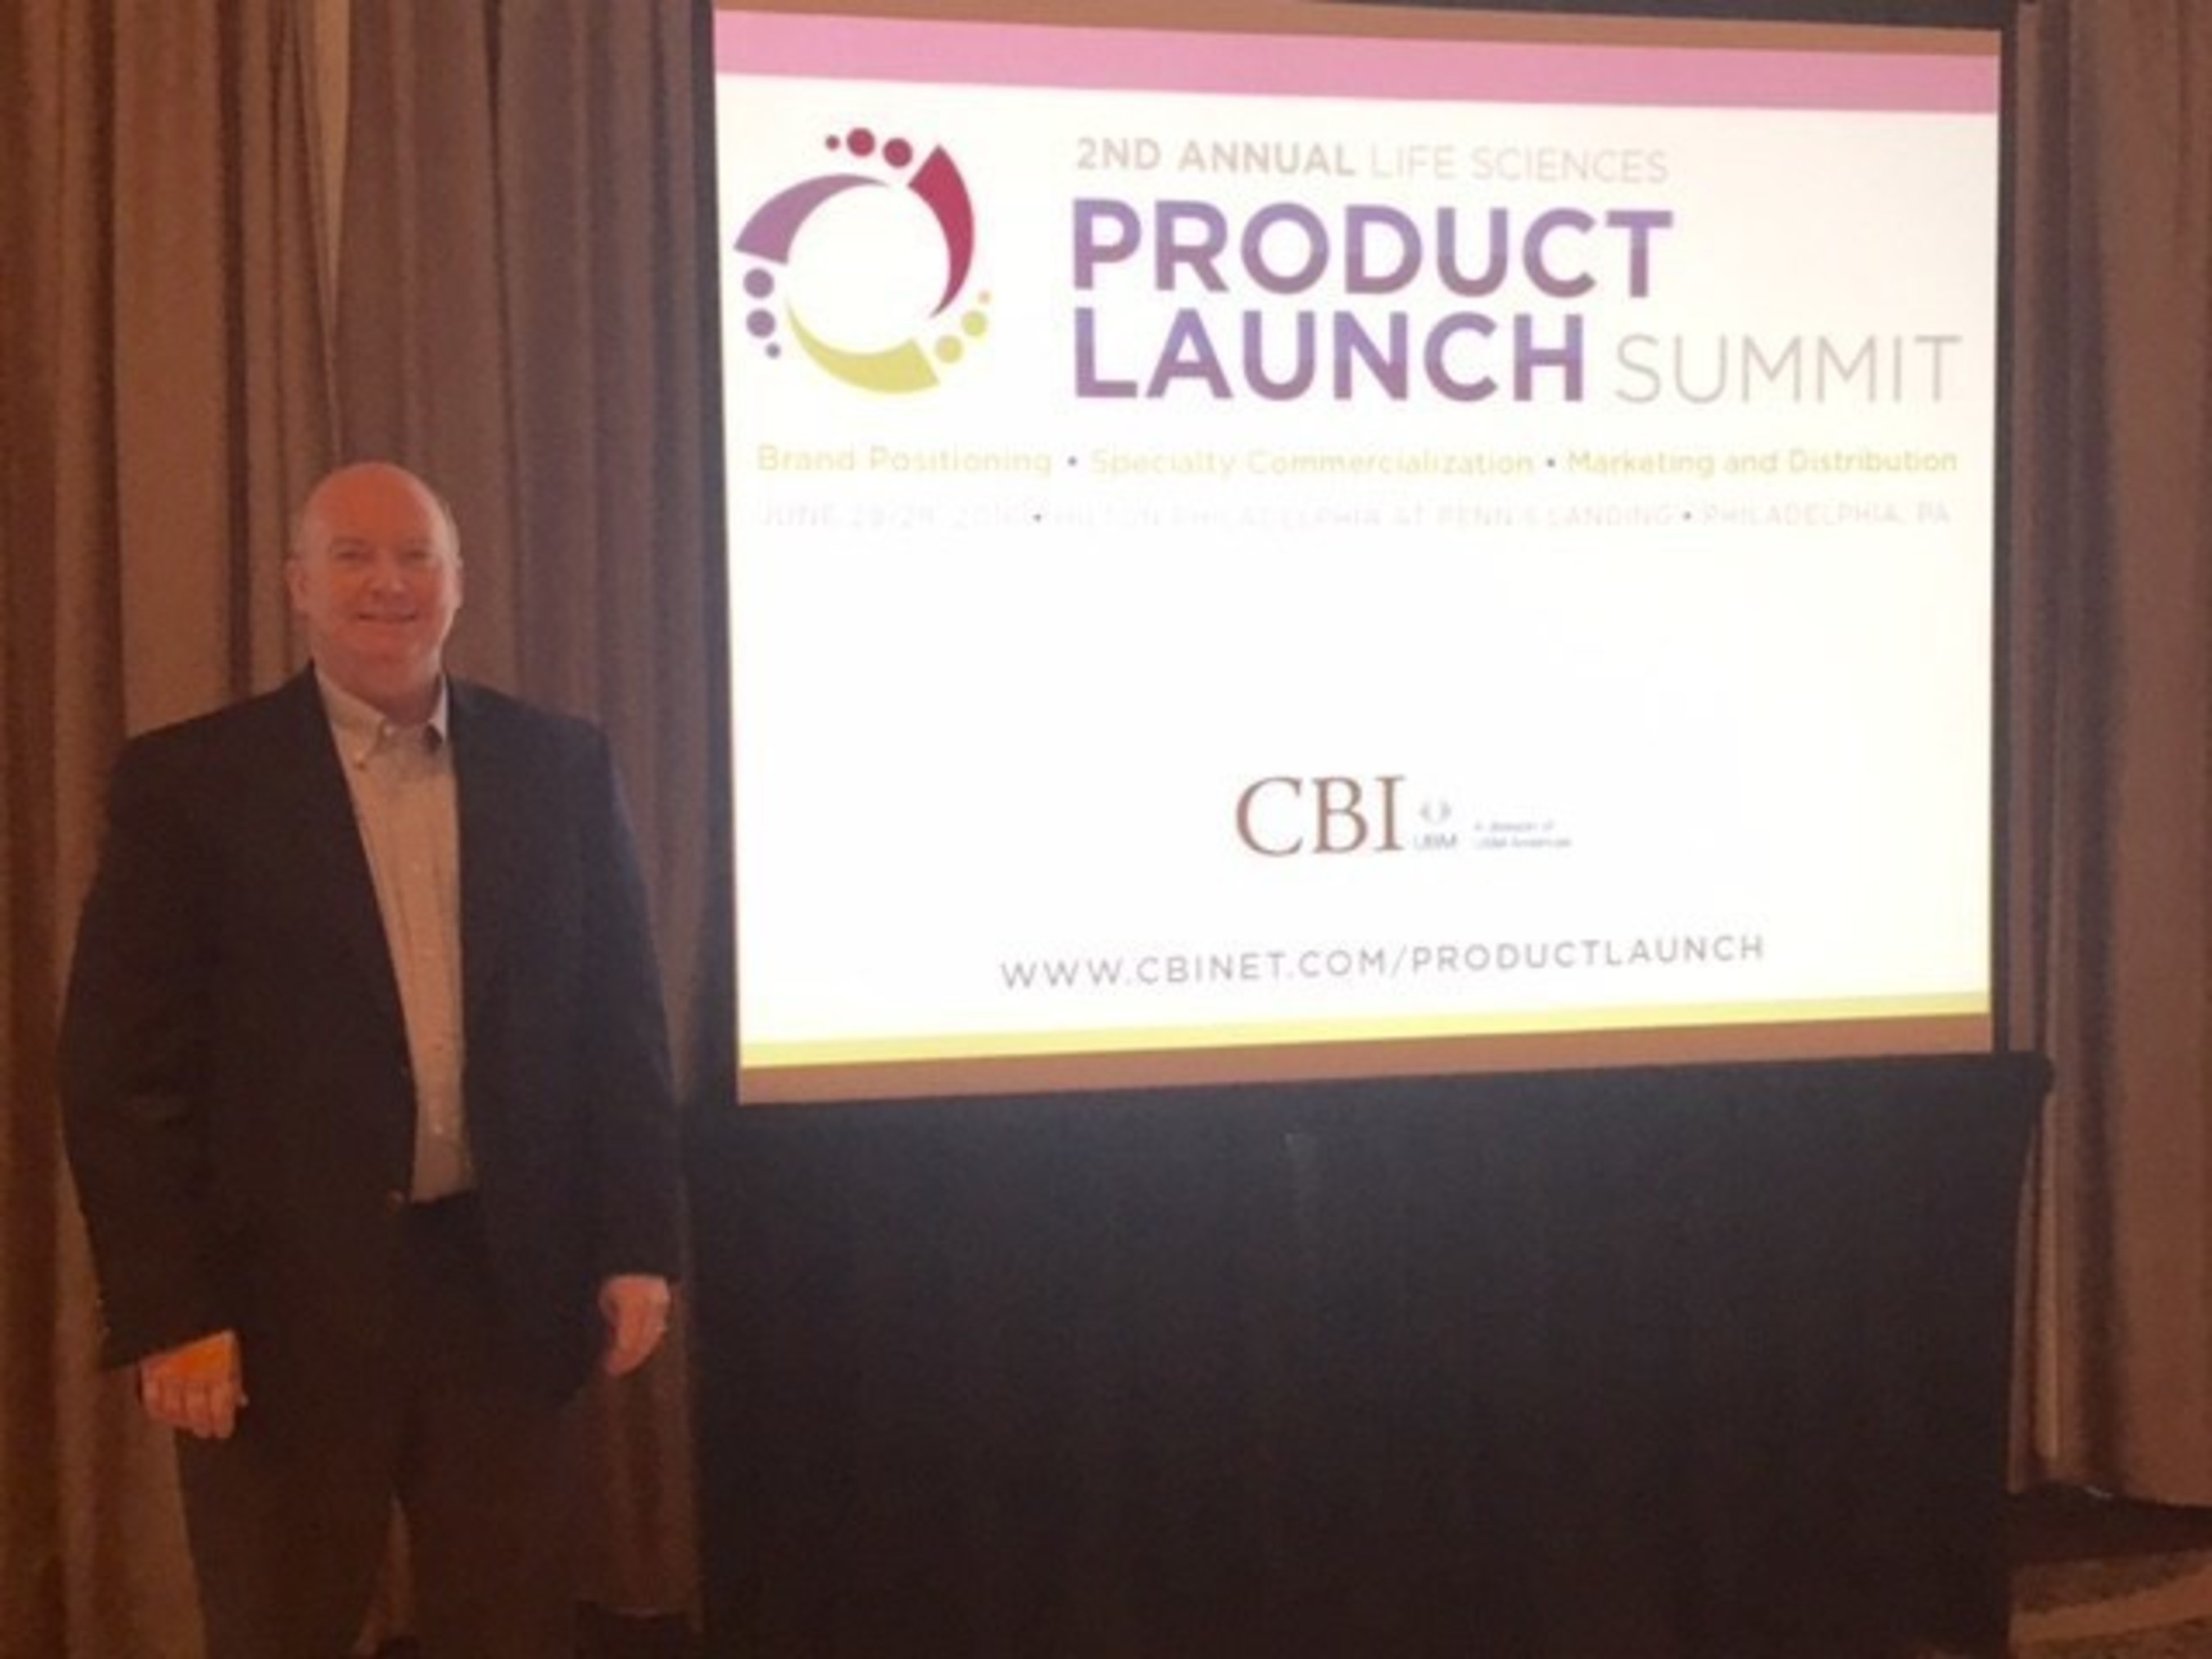 Chief Operating Officer of Alamo Pharma Services Peter Marchesini at the Second Annual Life Sciences Product Launch Summit in Philadelphia on June 29.